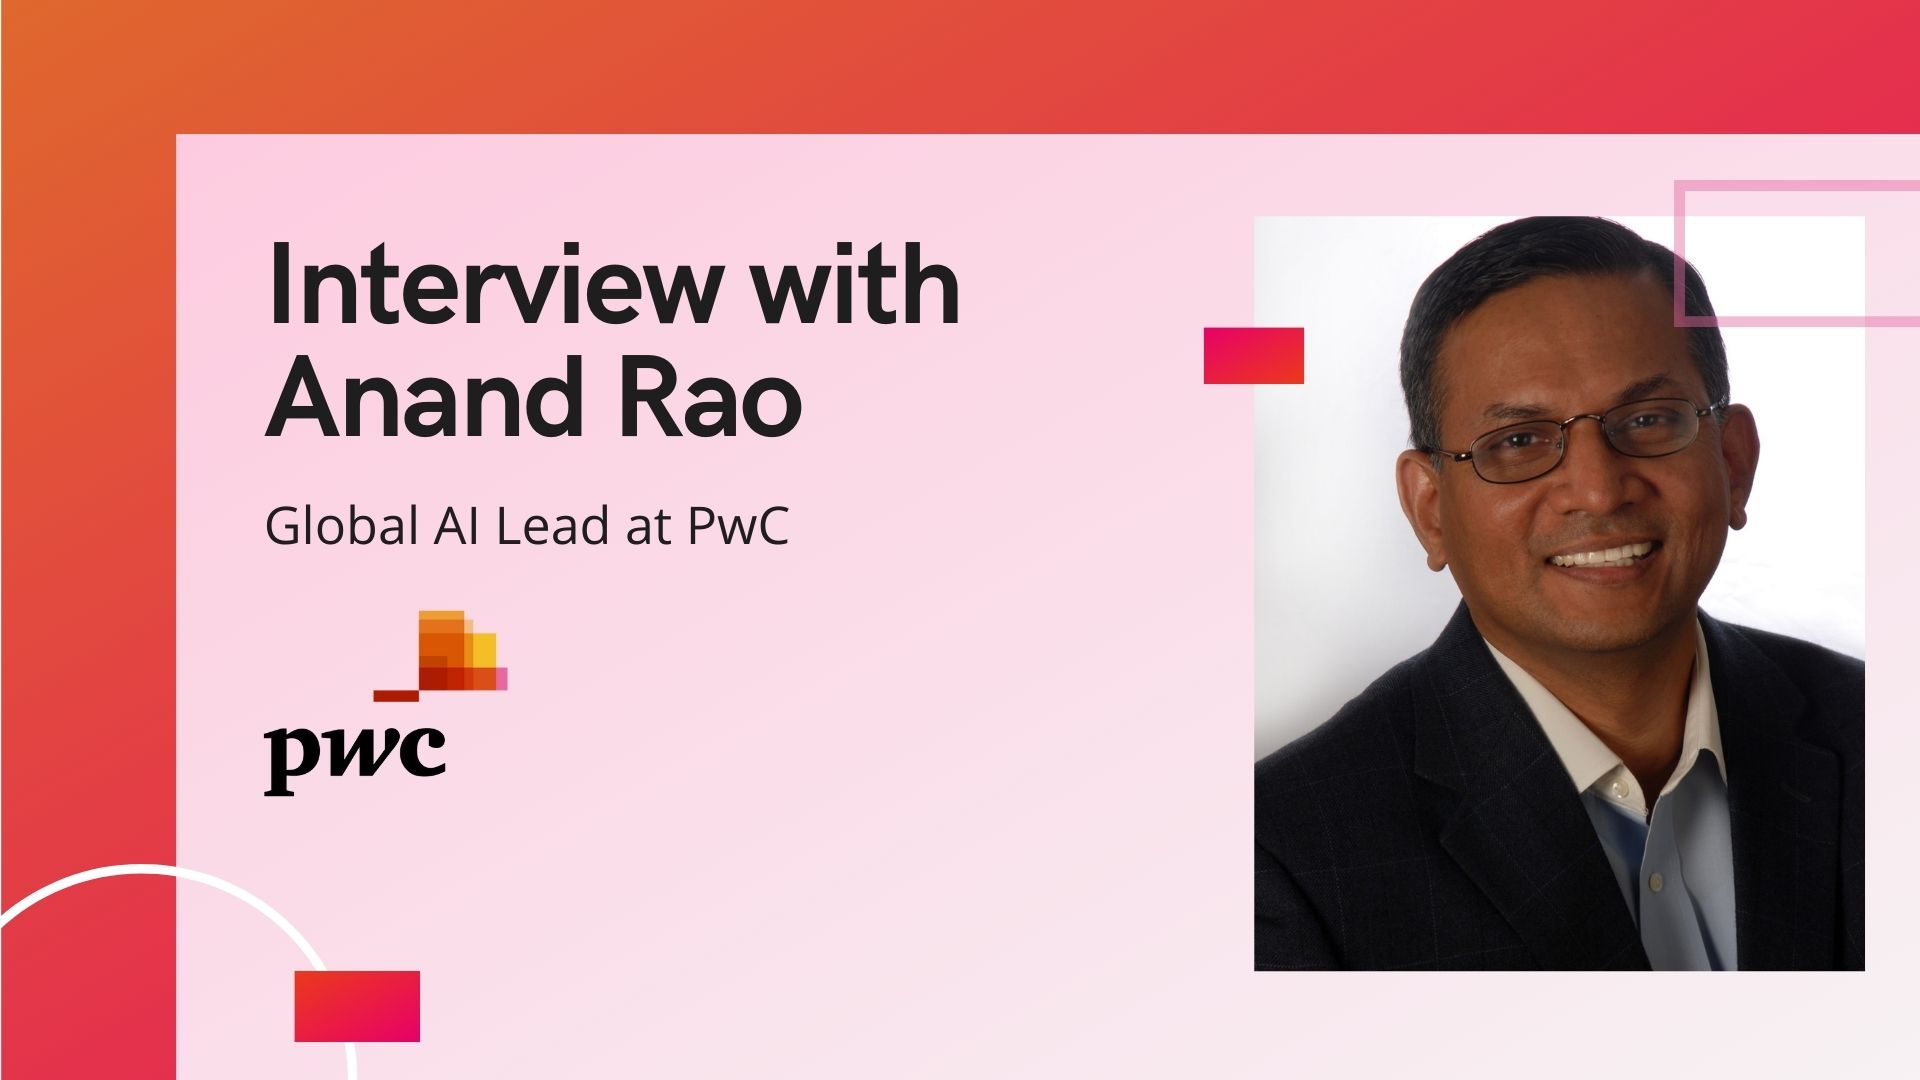 Anand Rao, Global Artificial Intelligence Lead at PwC